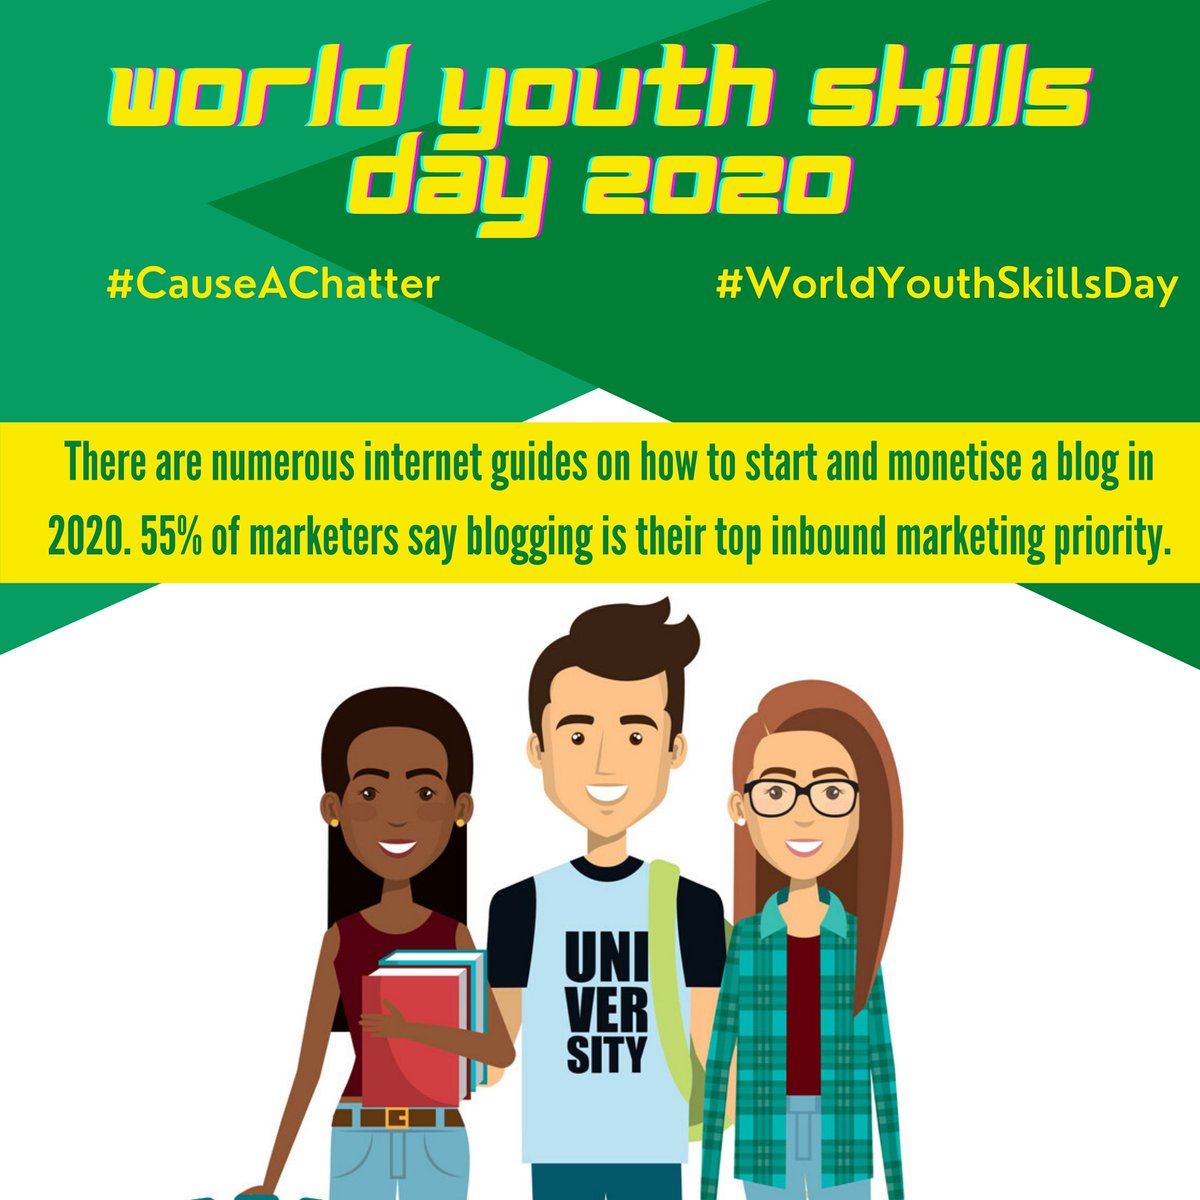 Blogging and content creation has found new aspirational value. The tool of blogging can be used to reach audiences far and wide and talk about important issues. It is not just a hobby anymore and more youth is taking it up as a career.  #WorldYouthSkillsDay  #CauseAChatter